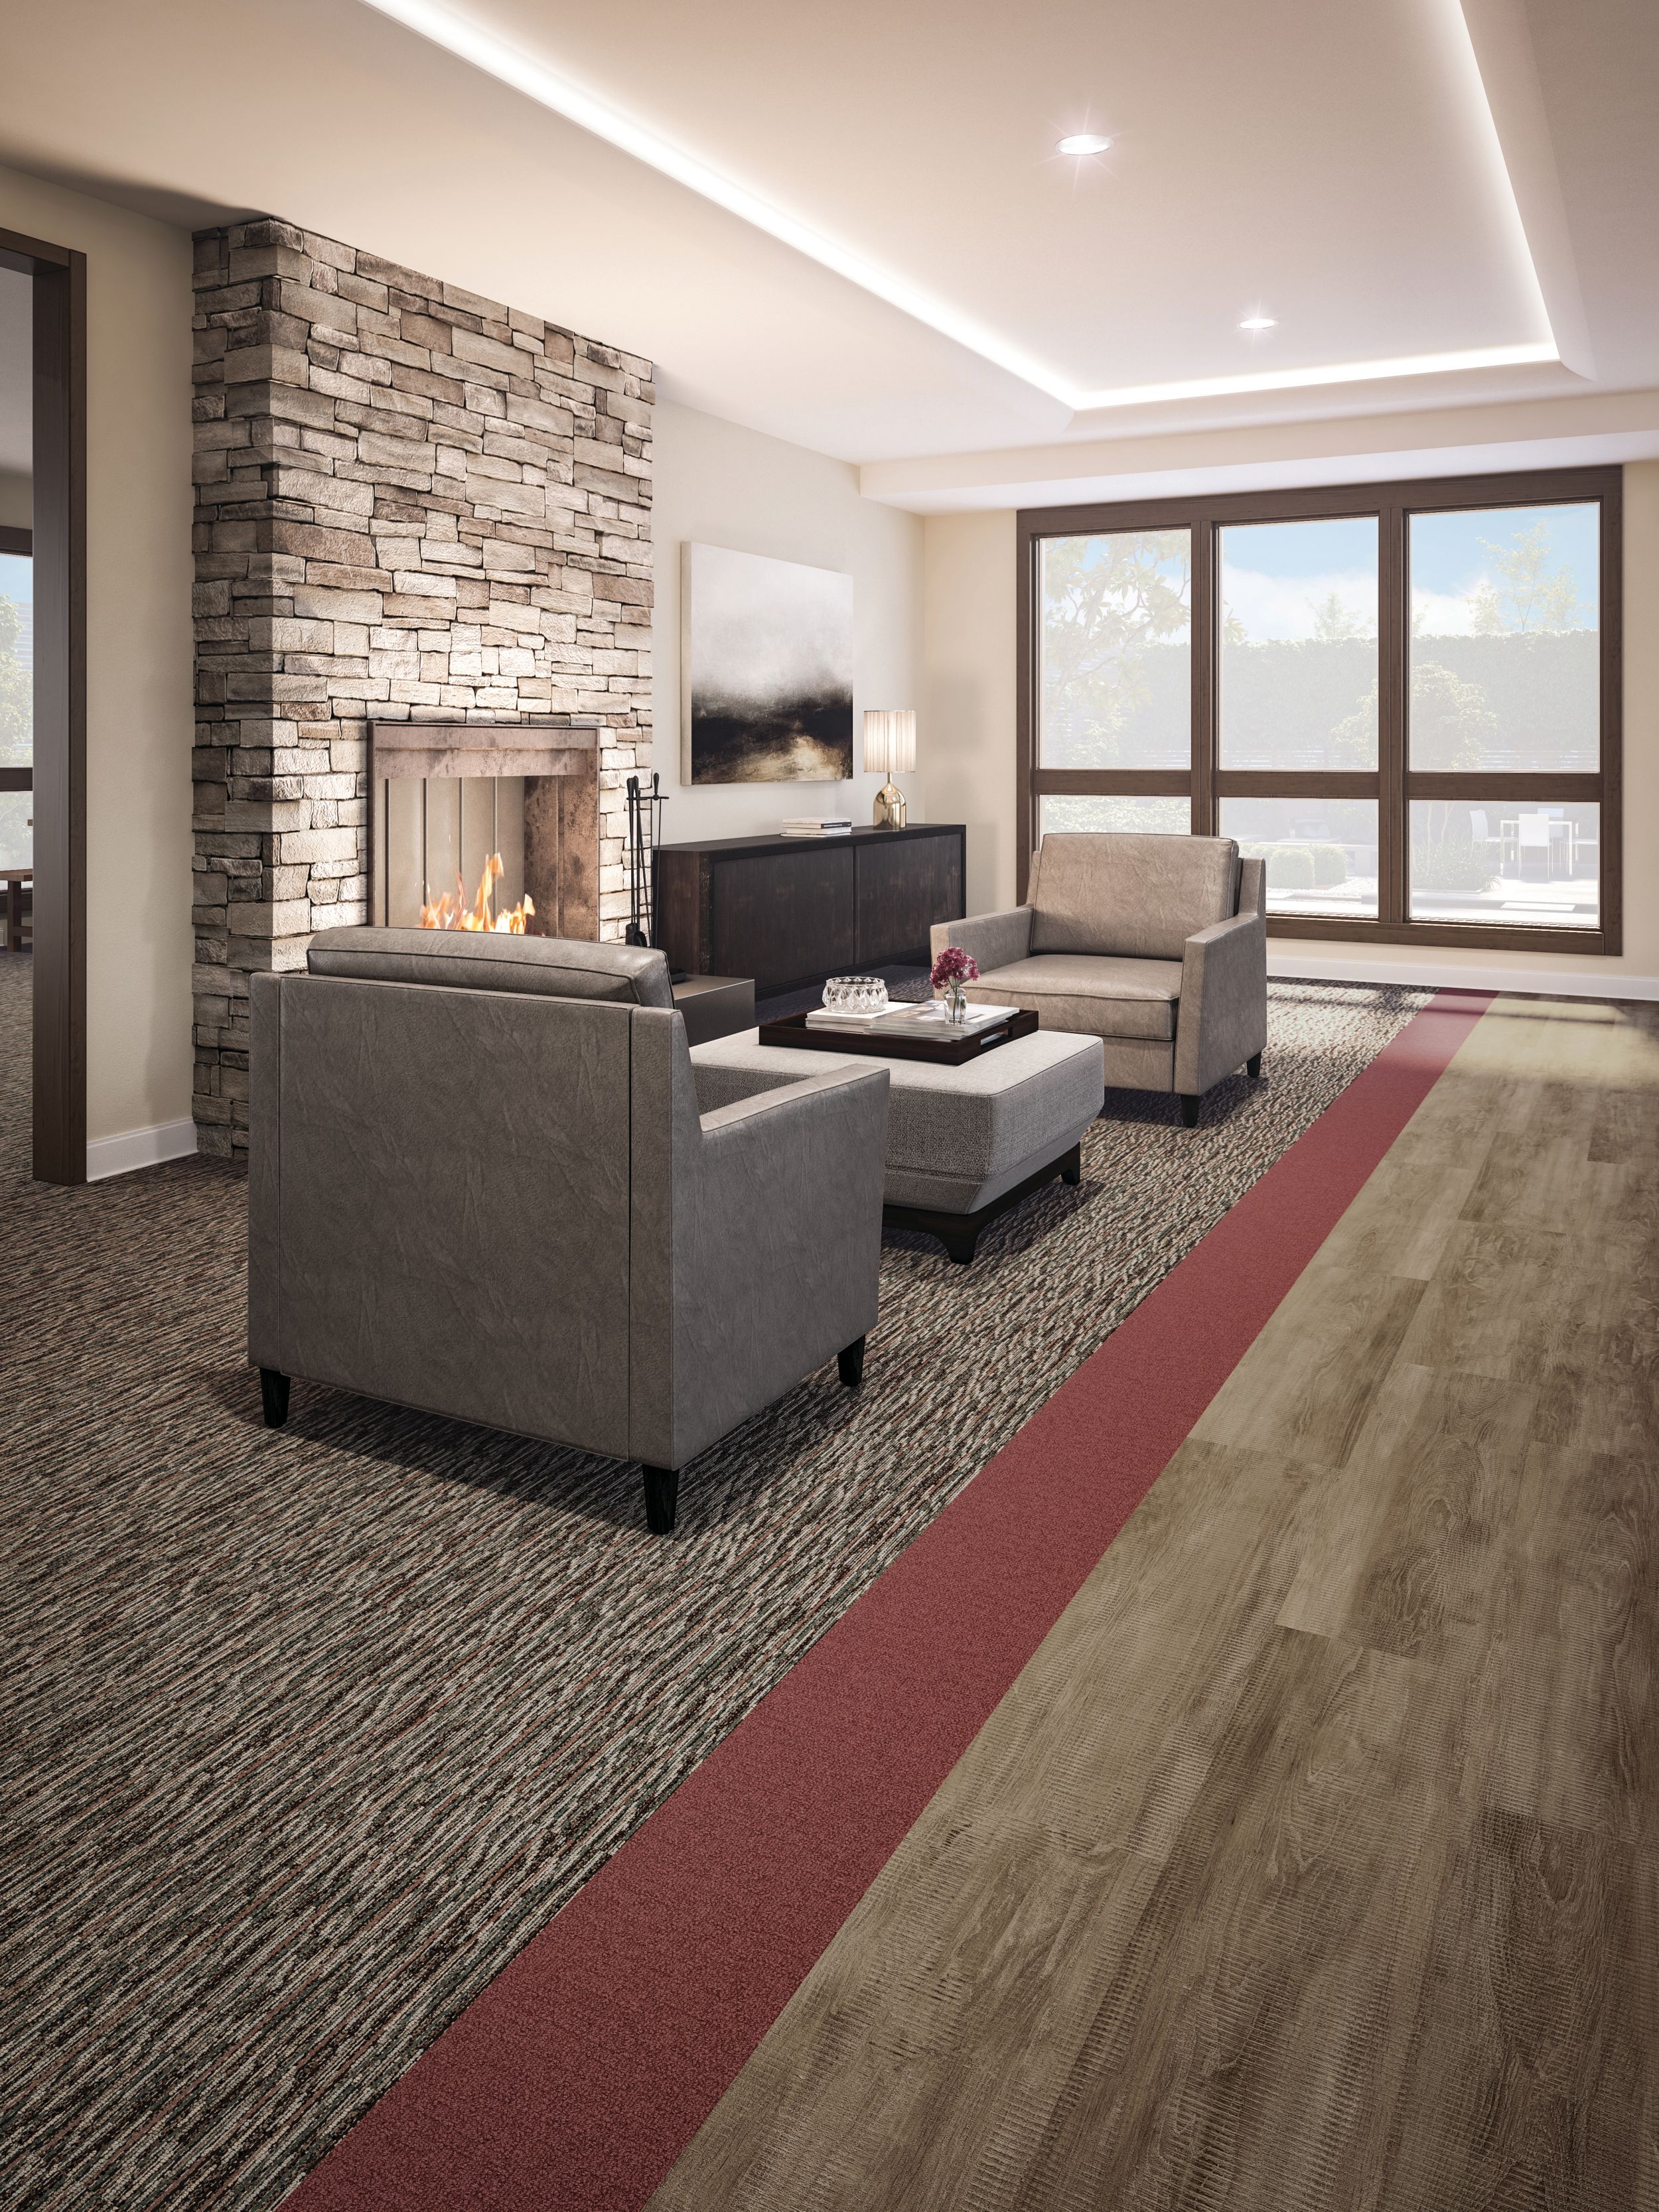 Interface Farmland and Monochrome carpet tile with Textured Woodograins LVT in senior housing seating area with stone fireplace imagen número 12